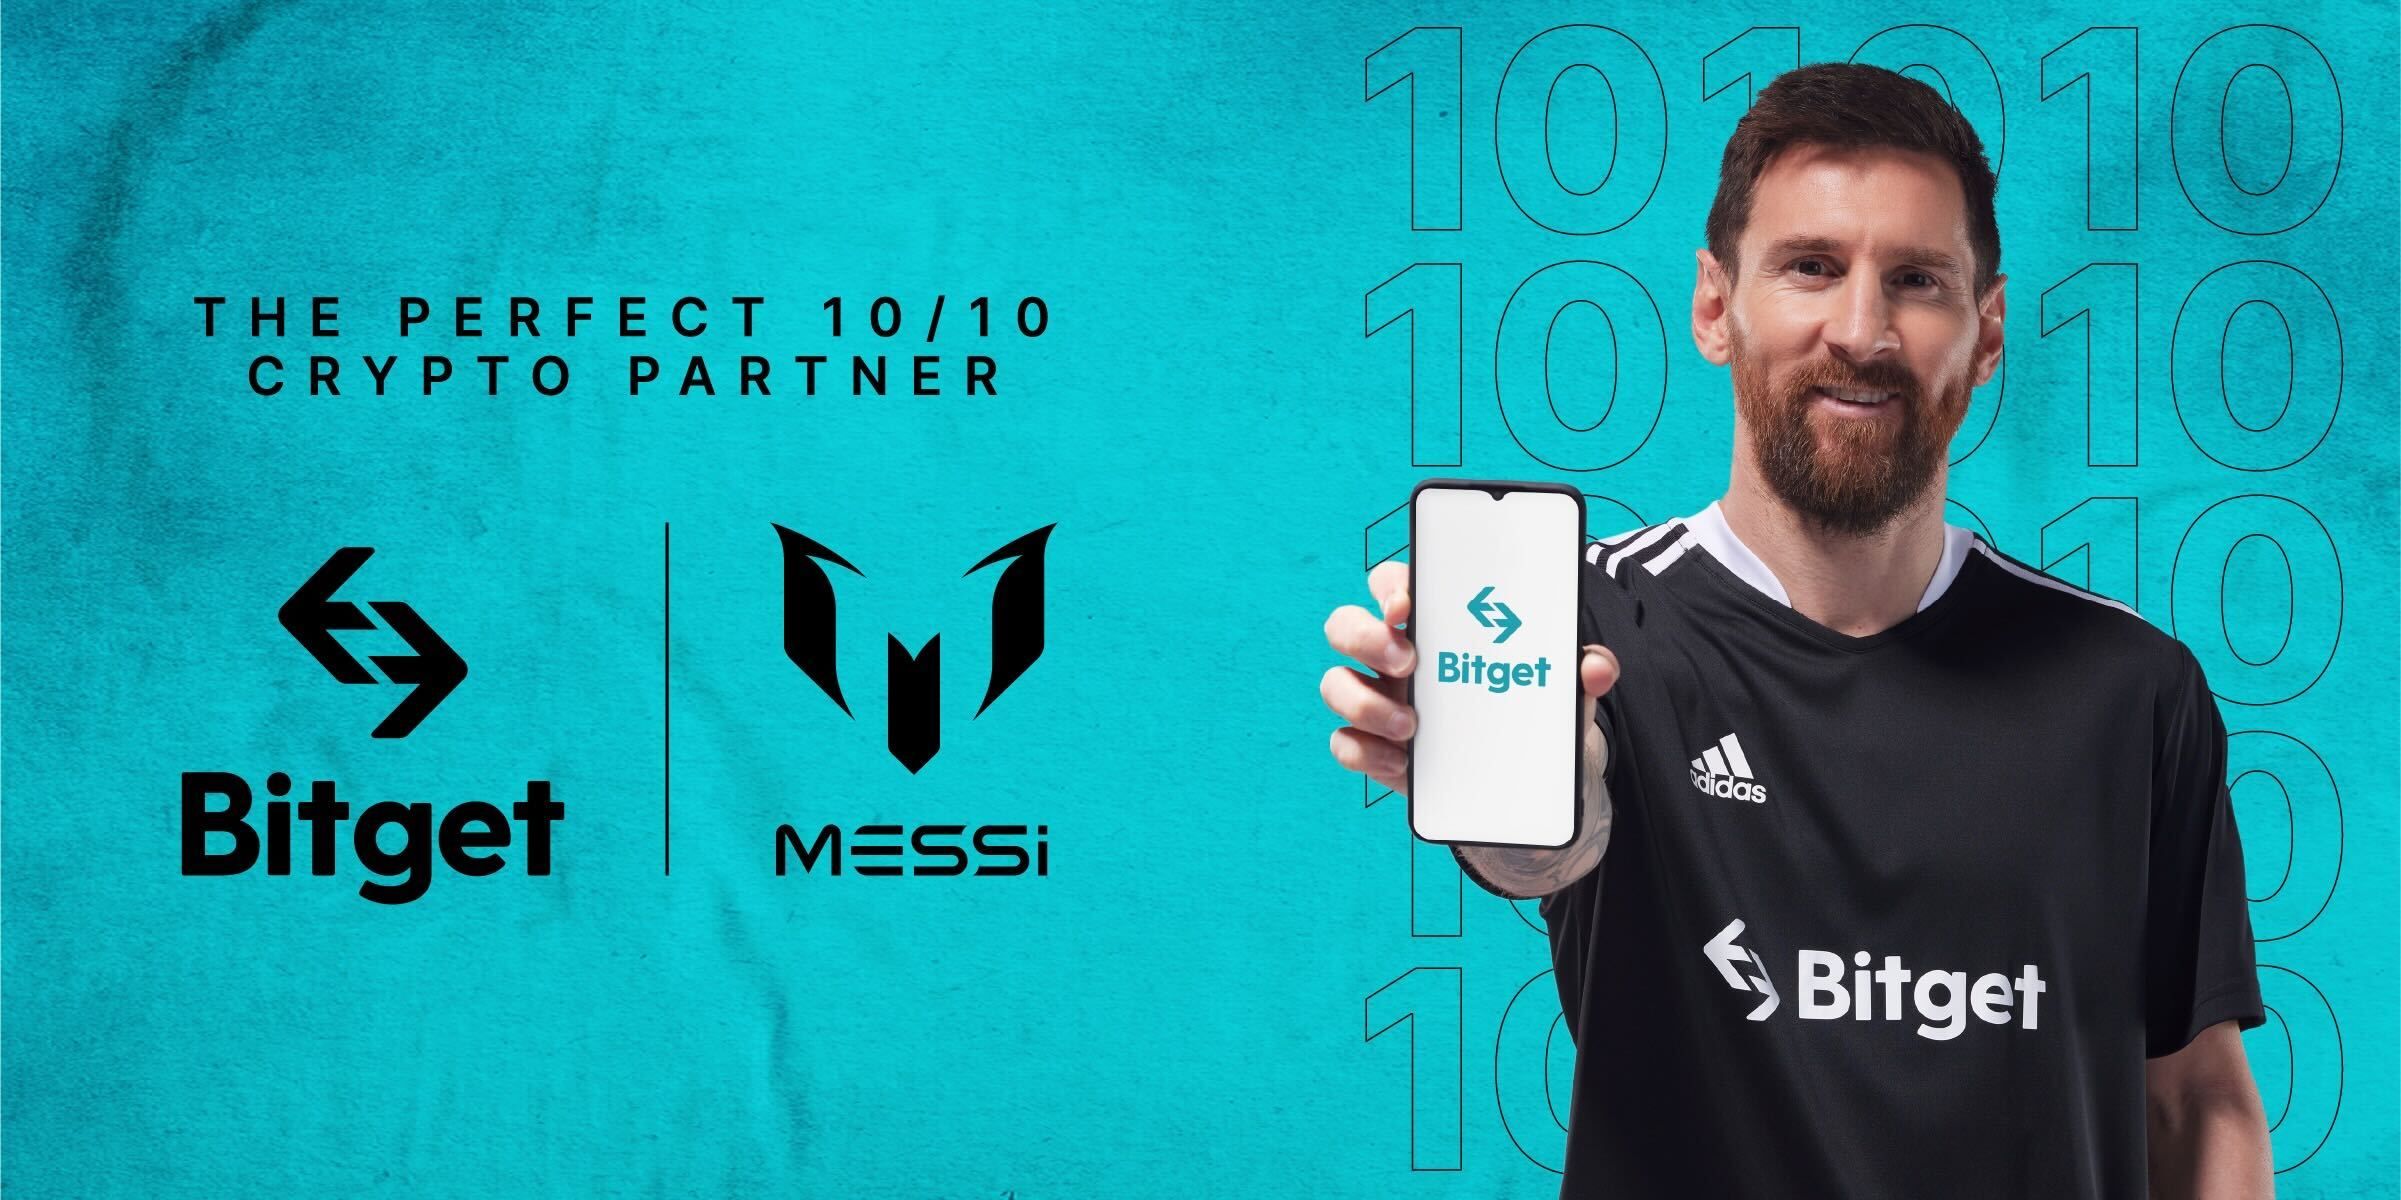  Messi Partners With Bitget To Enter The Crypto World